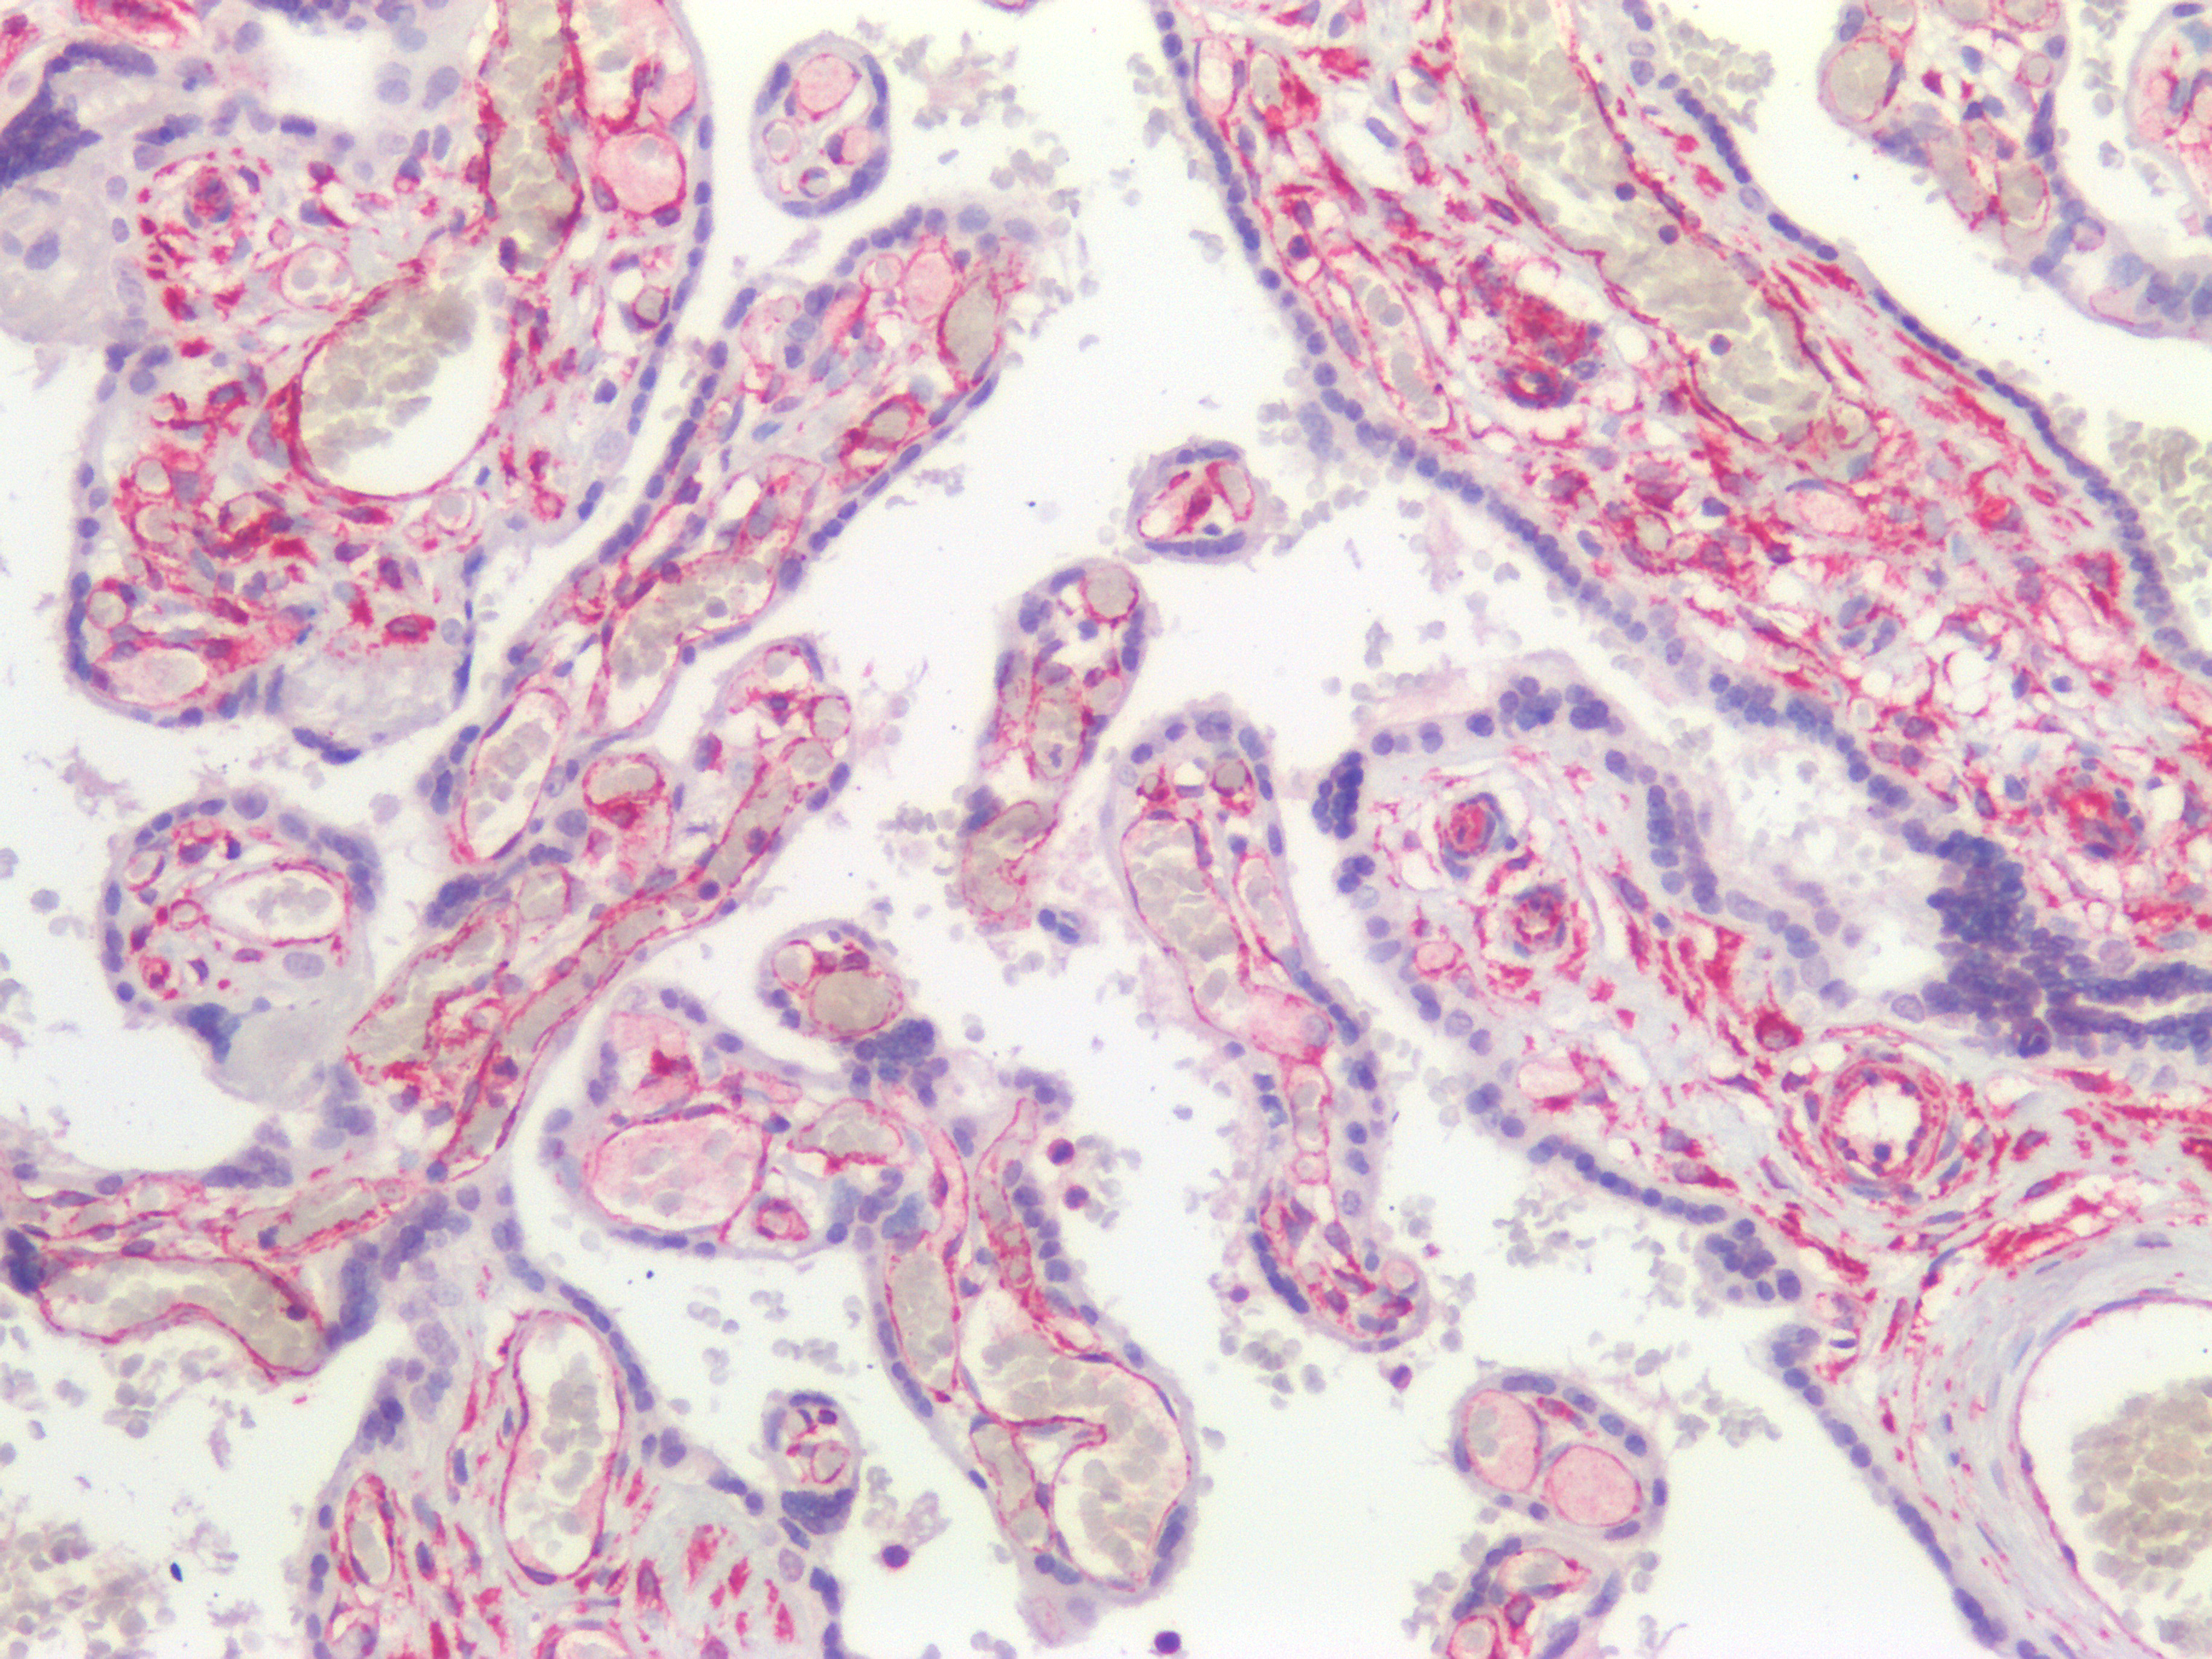 Figure 9. Immunohistochemistry on formalin fixed, paraffin embedded section of human placenta showing positive staining in connective tissue cells and no reactivity in epithelial cells.